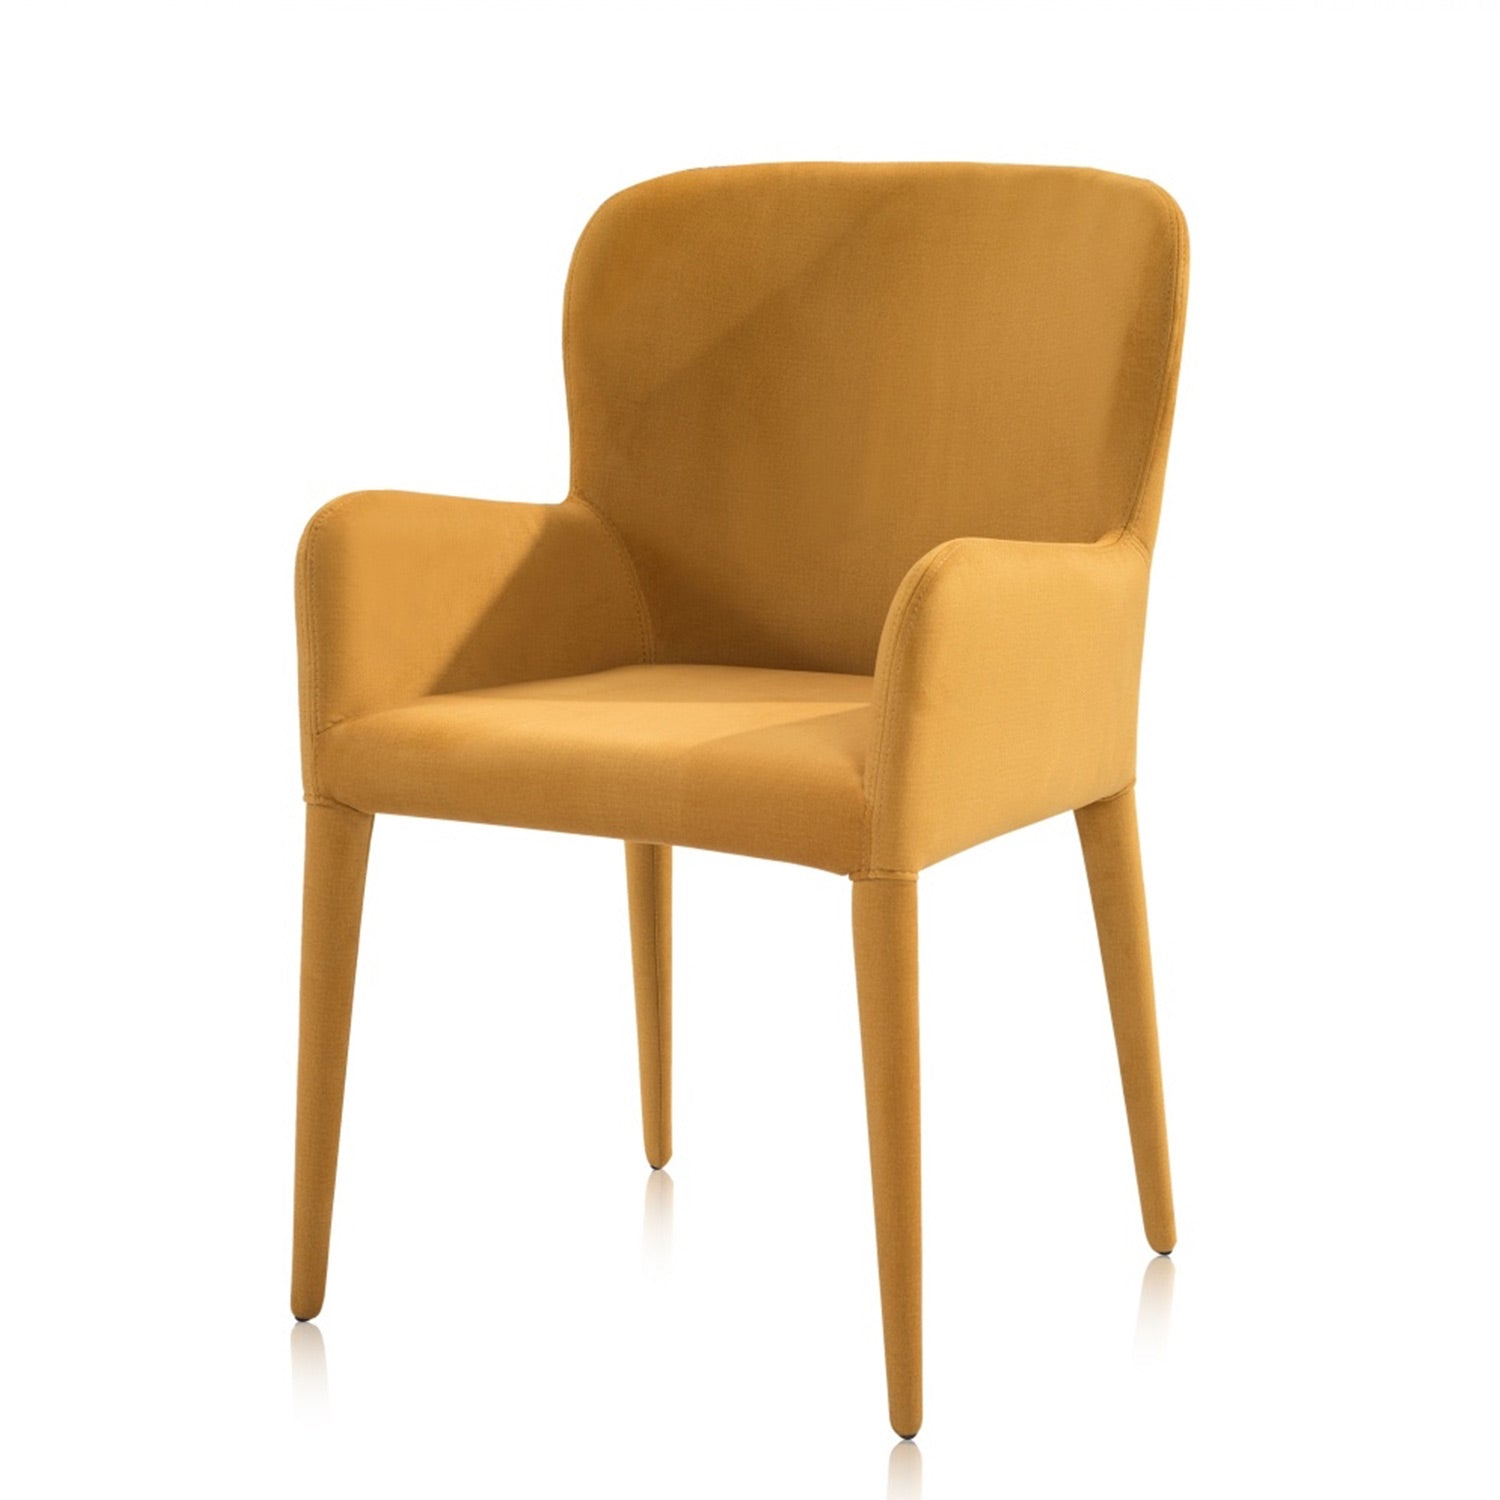 Aviano dining chair